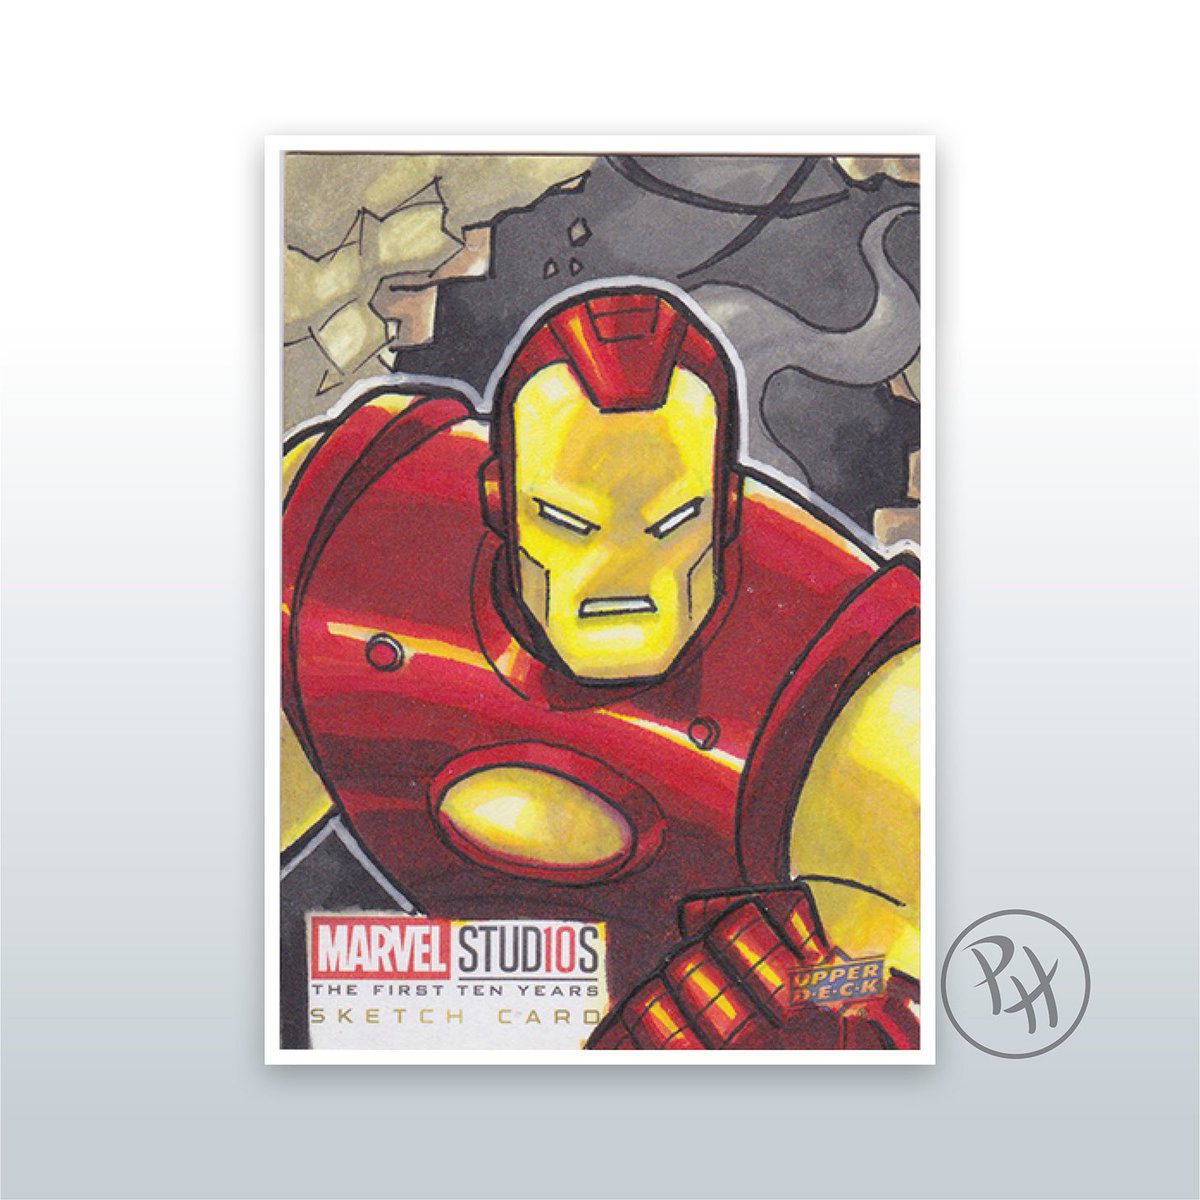 ‘I am Iron Man!’
Last of of my Iron Man characters for @UpperDeckEnt latest set Marvel 10th Anniversary. Love the classic Red & Gold armour 😊
.
#ironman #mcu10 #mcu10years #upperdeck #sketchcard #marvel #tradingcard #artisttradingcard #markerart